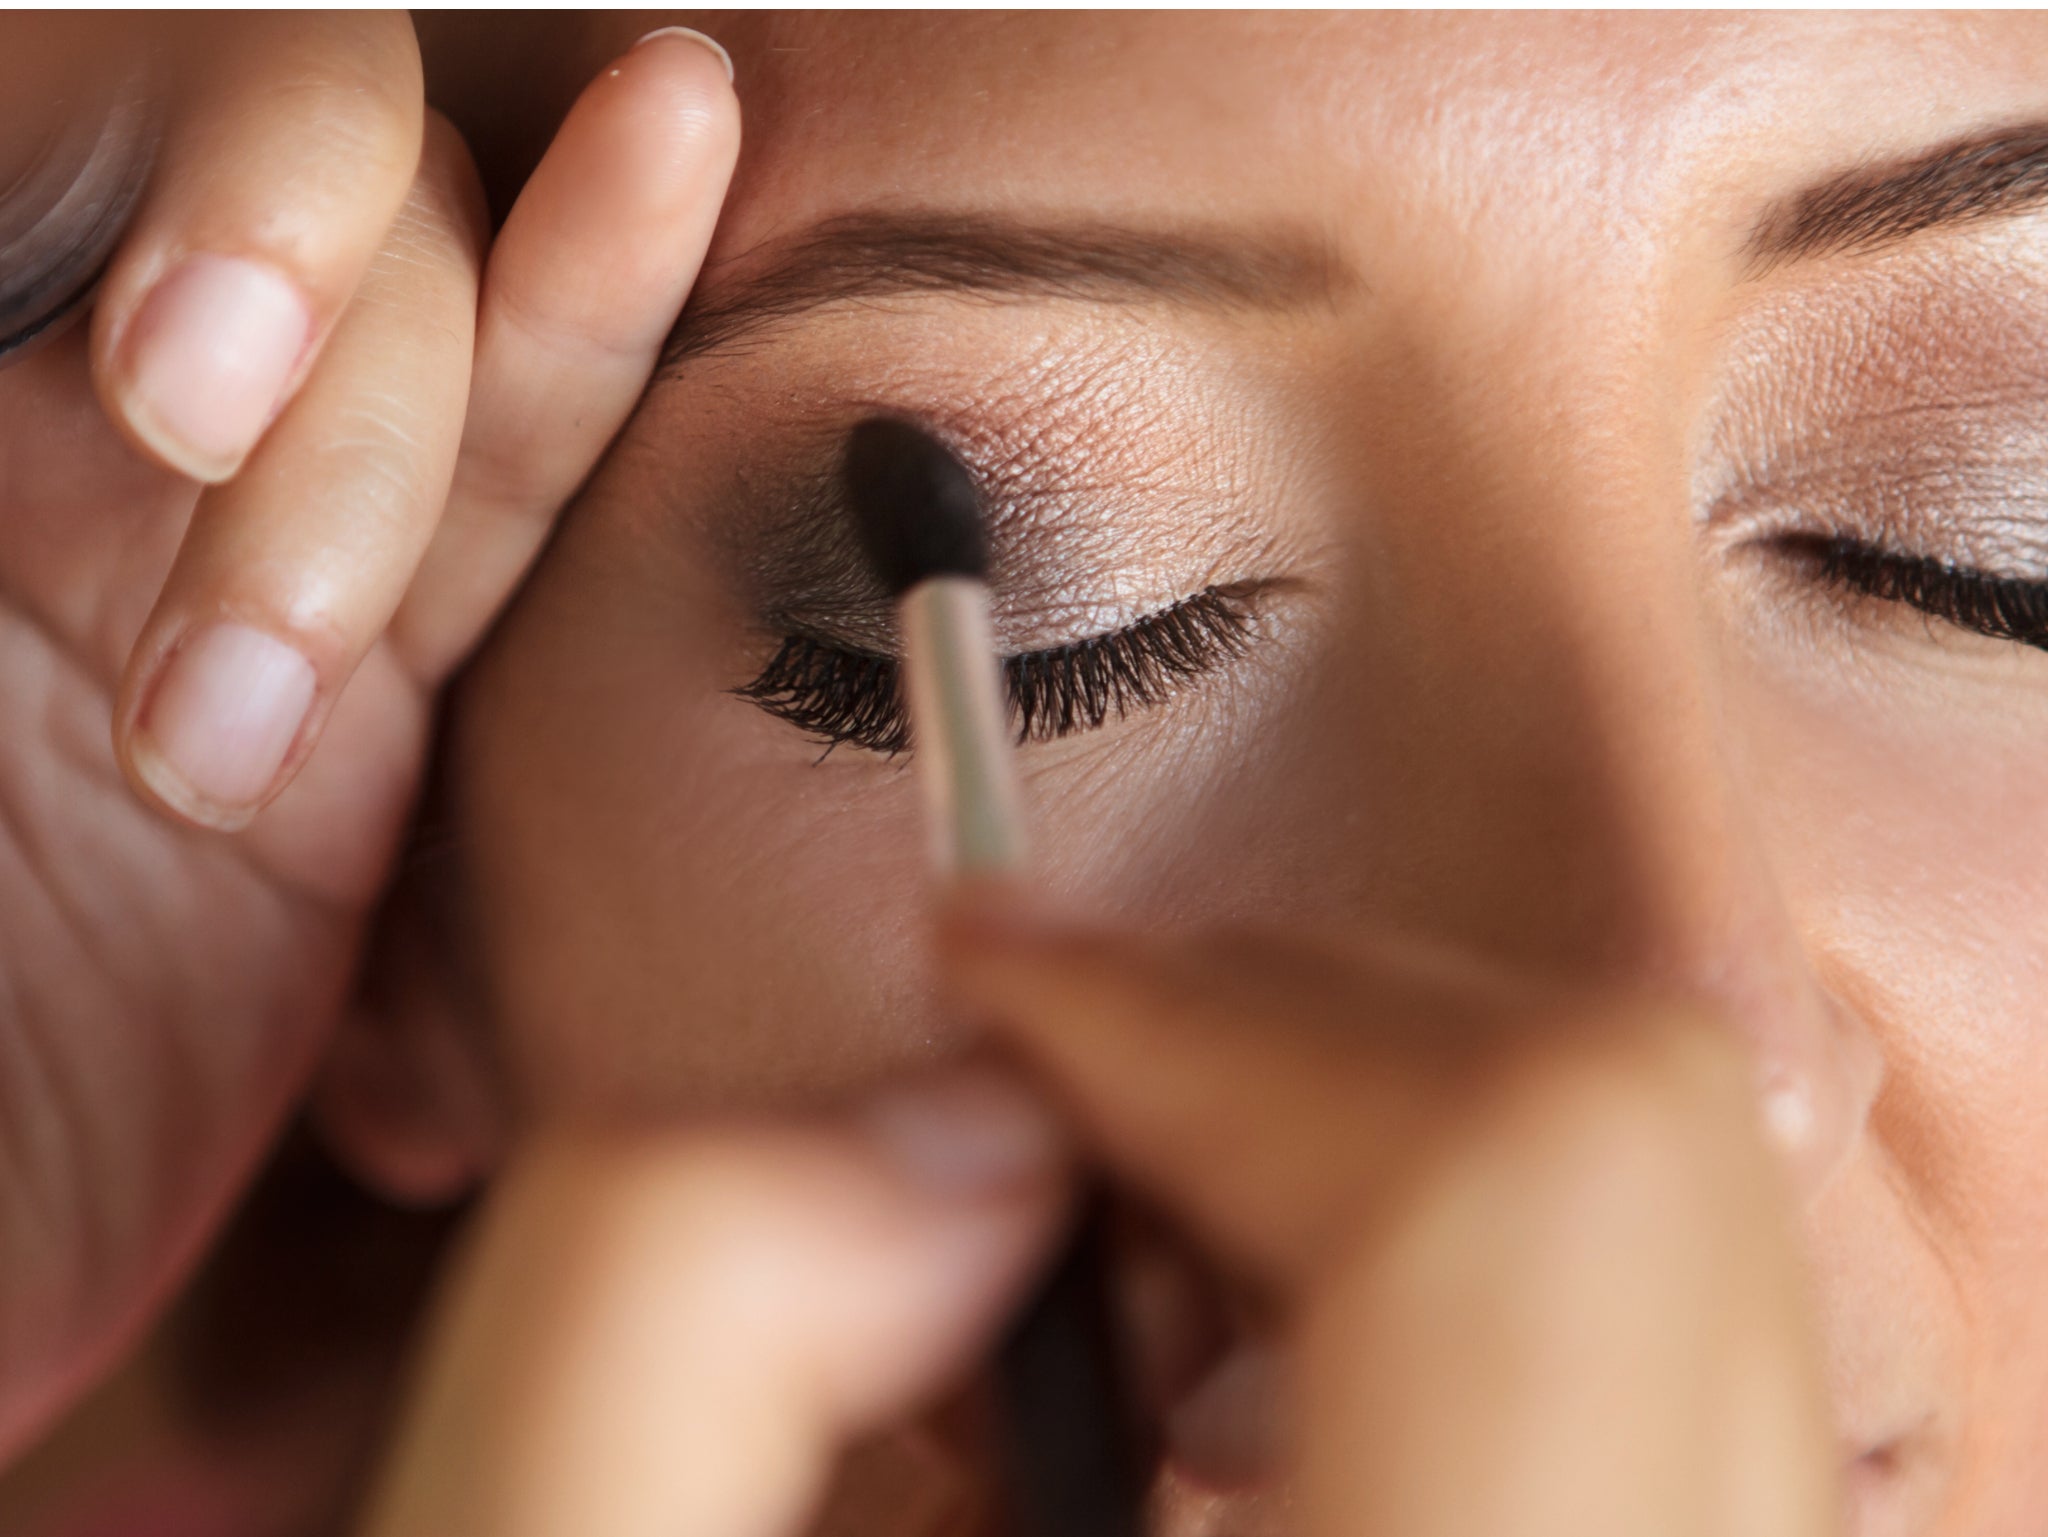 How to Find Makeup That's Free of Cancer-Linked 'Forever Chemicals